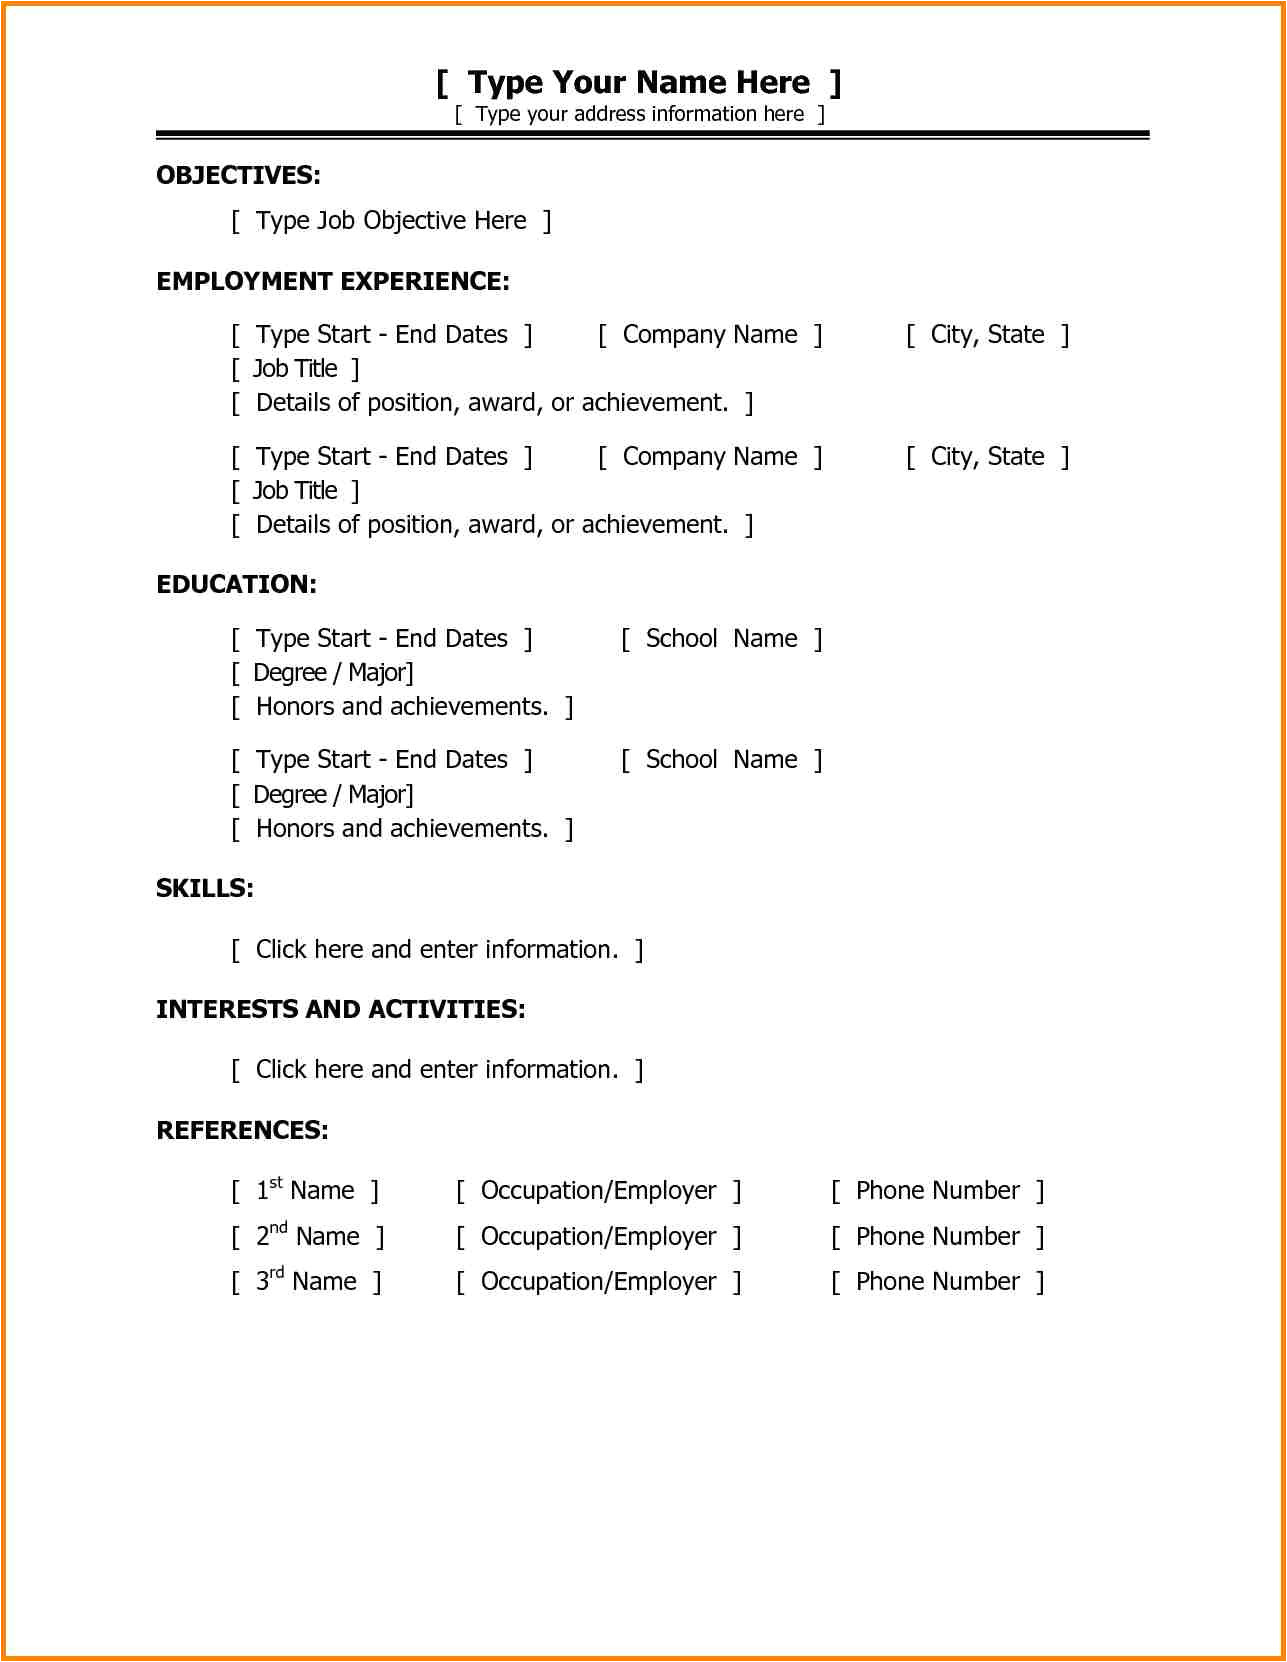 Basic Resume Making 8 Example Of A Simple Cv Layout Penn Working Papers